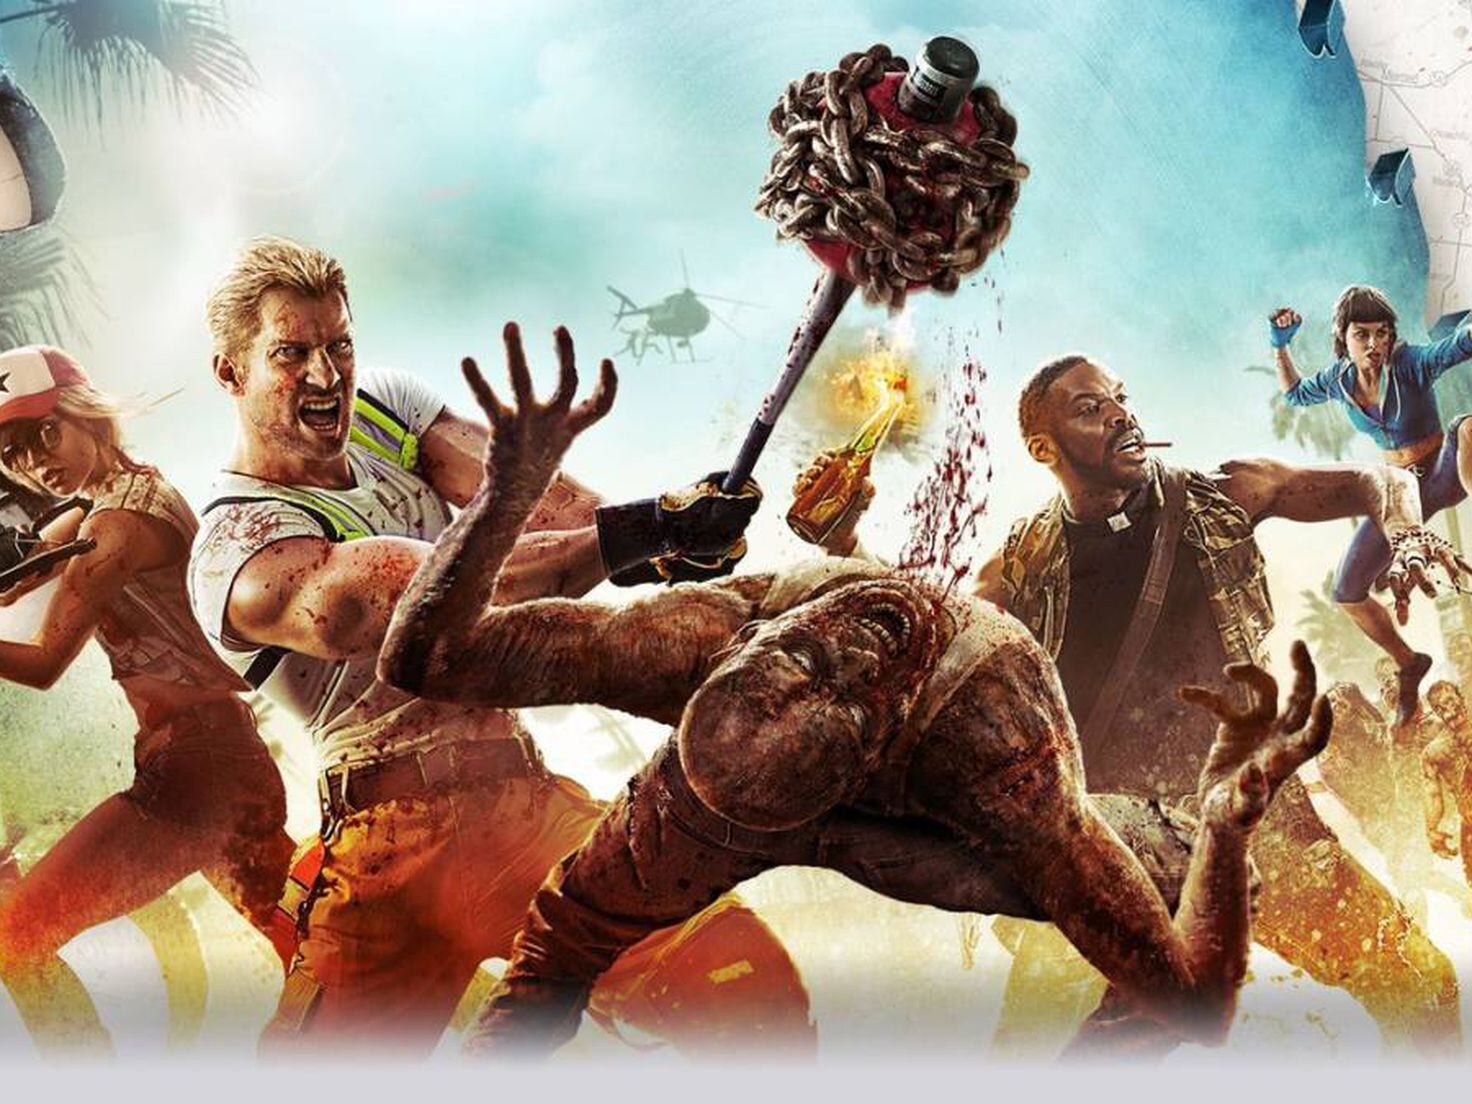 Will Dead Island 2 be on Steam? Answered